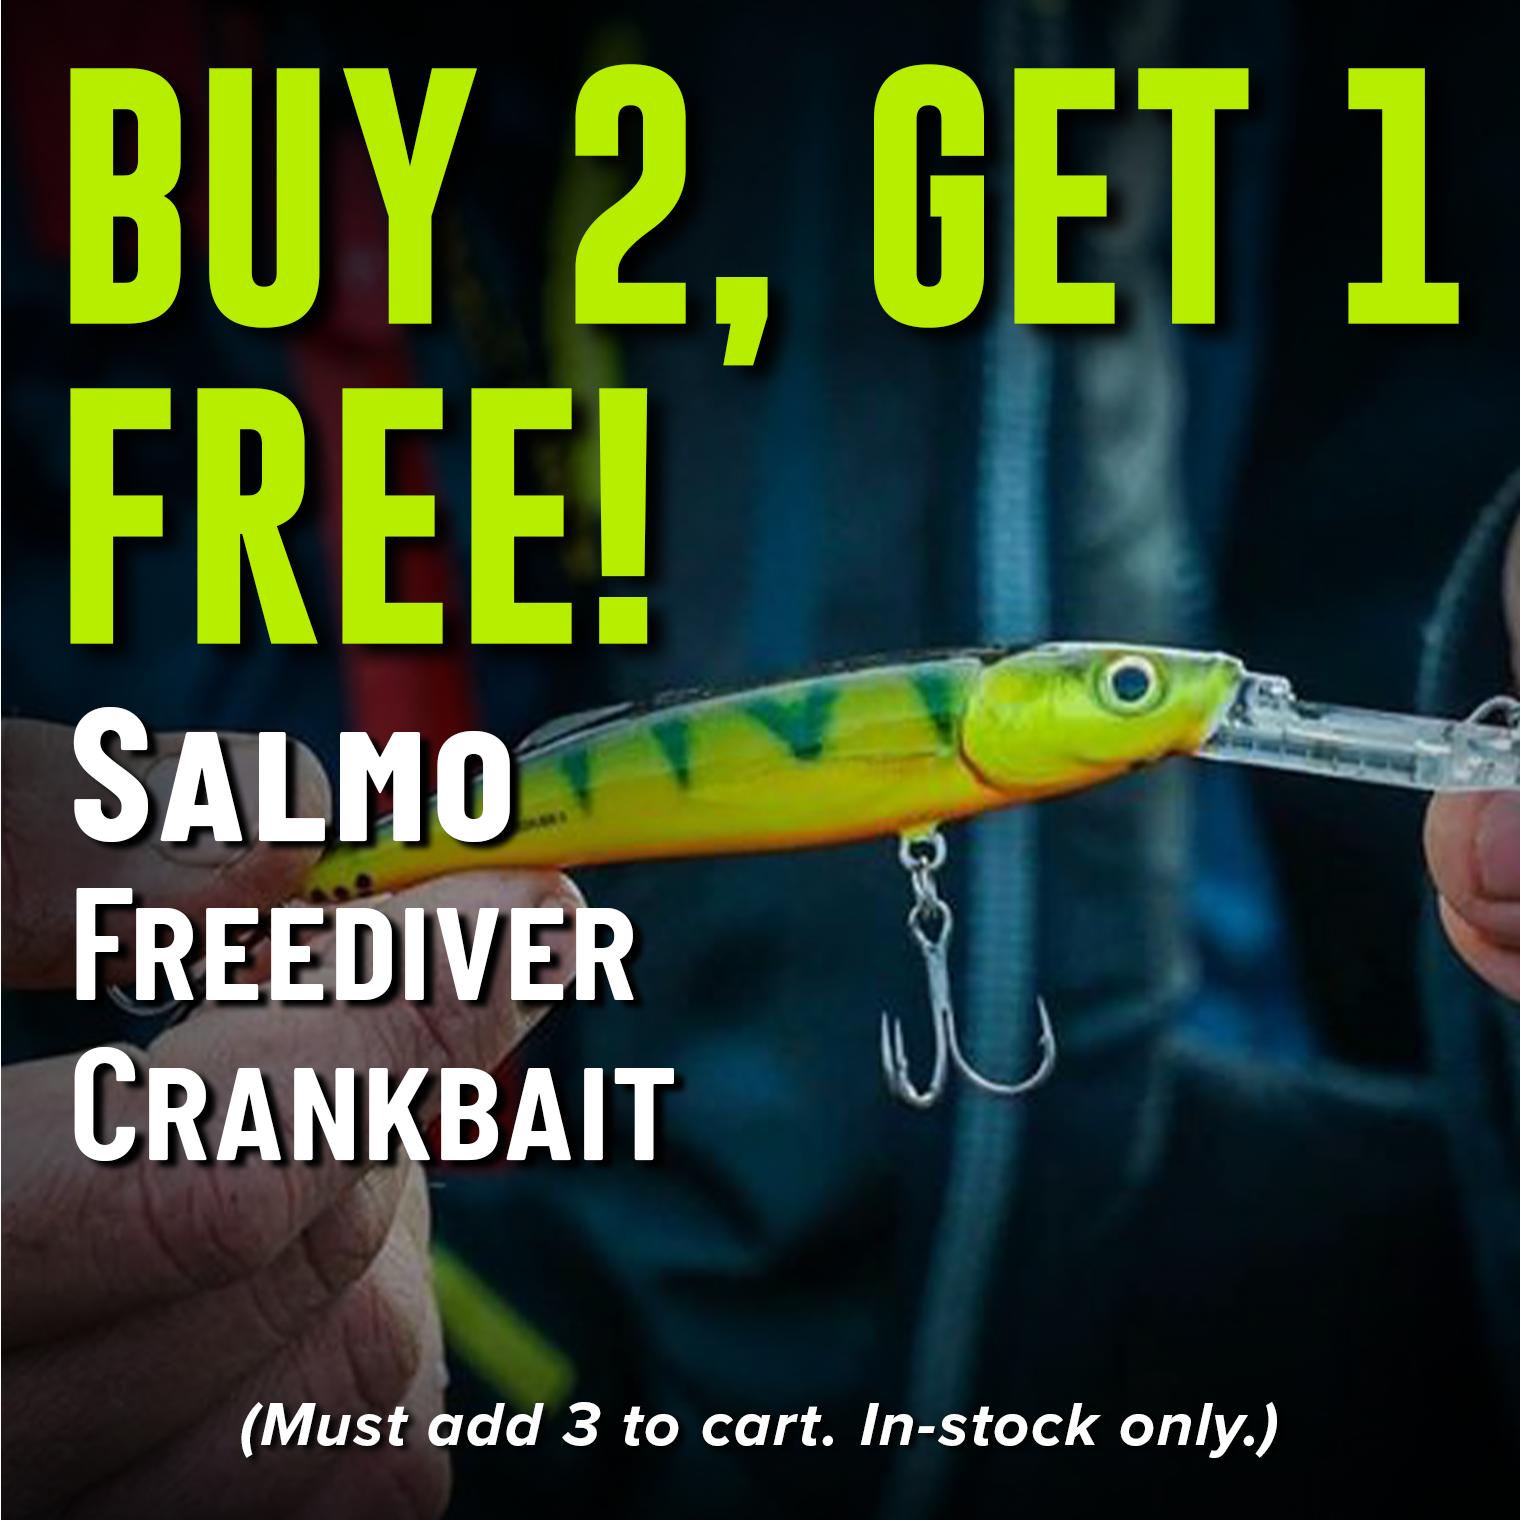 Buy 2, Get 1 Free! Salmo Freediver Crankbait (Must add 3 to cart. In-stock only.)